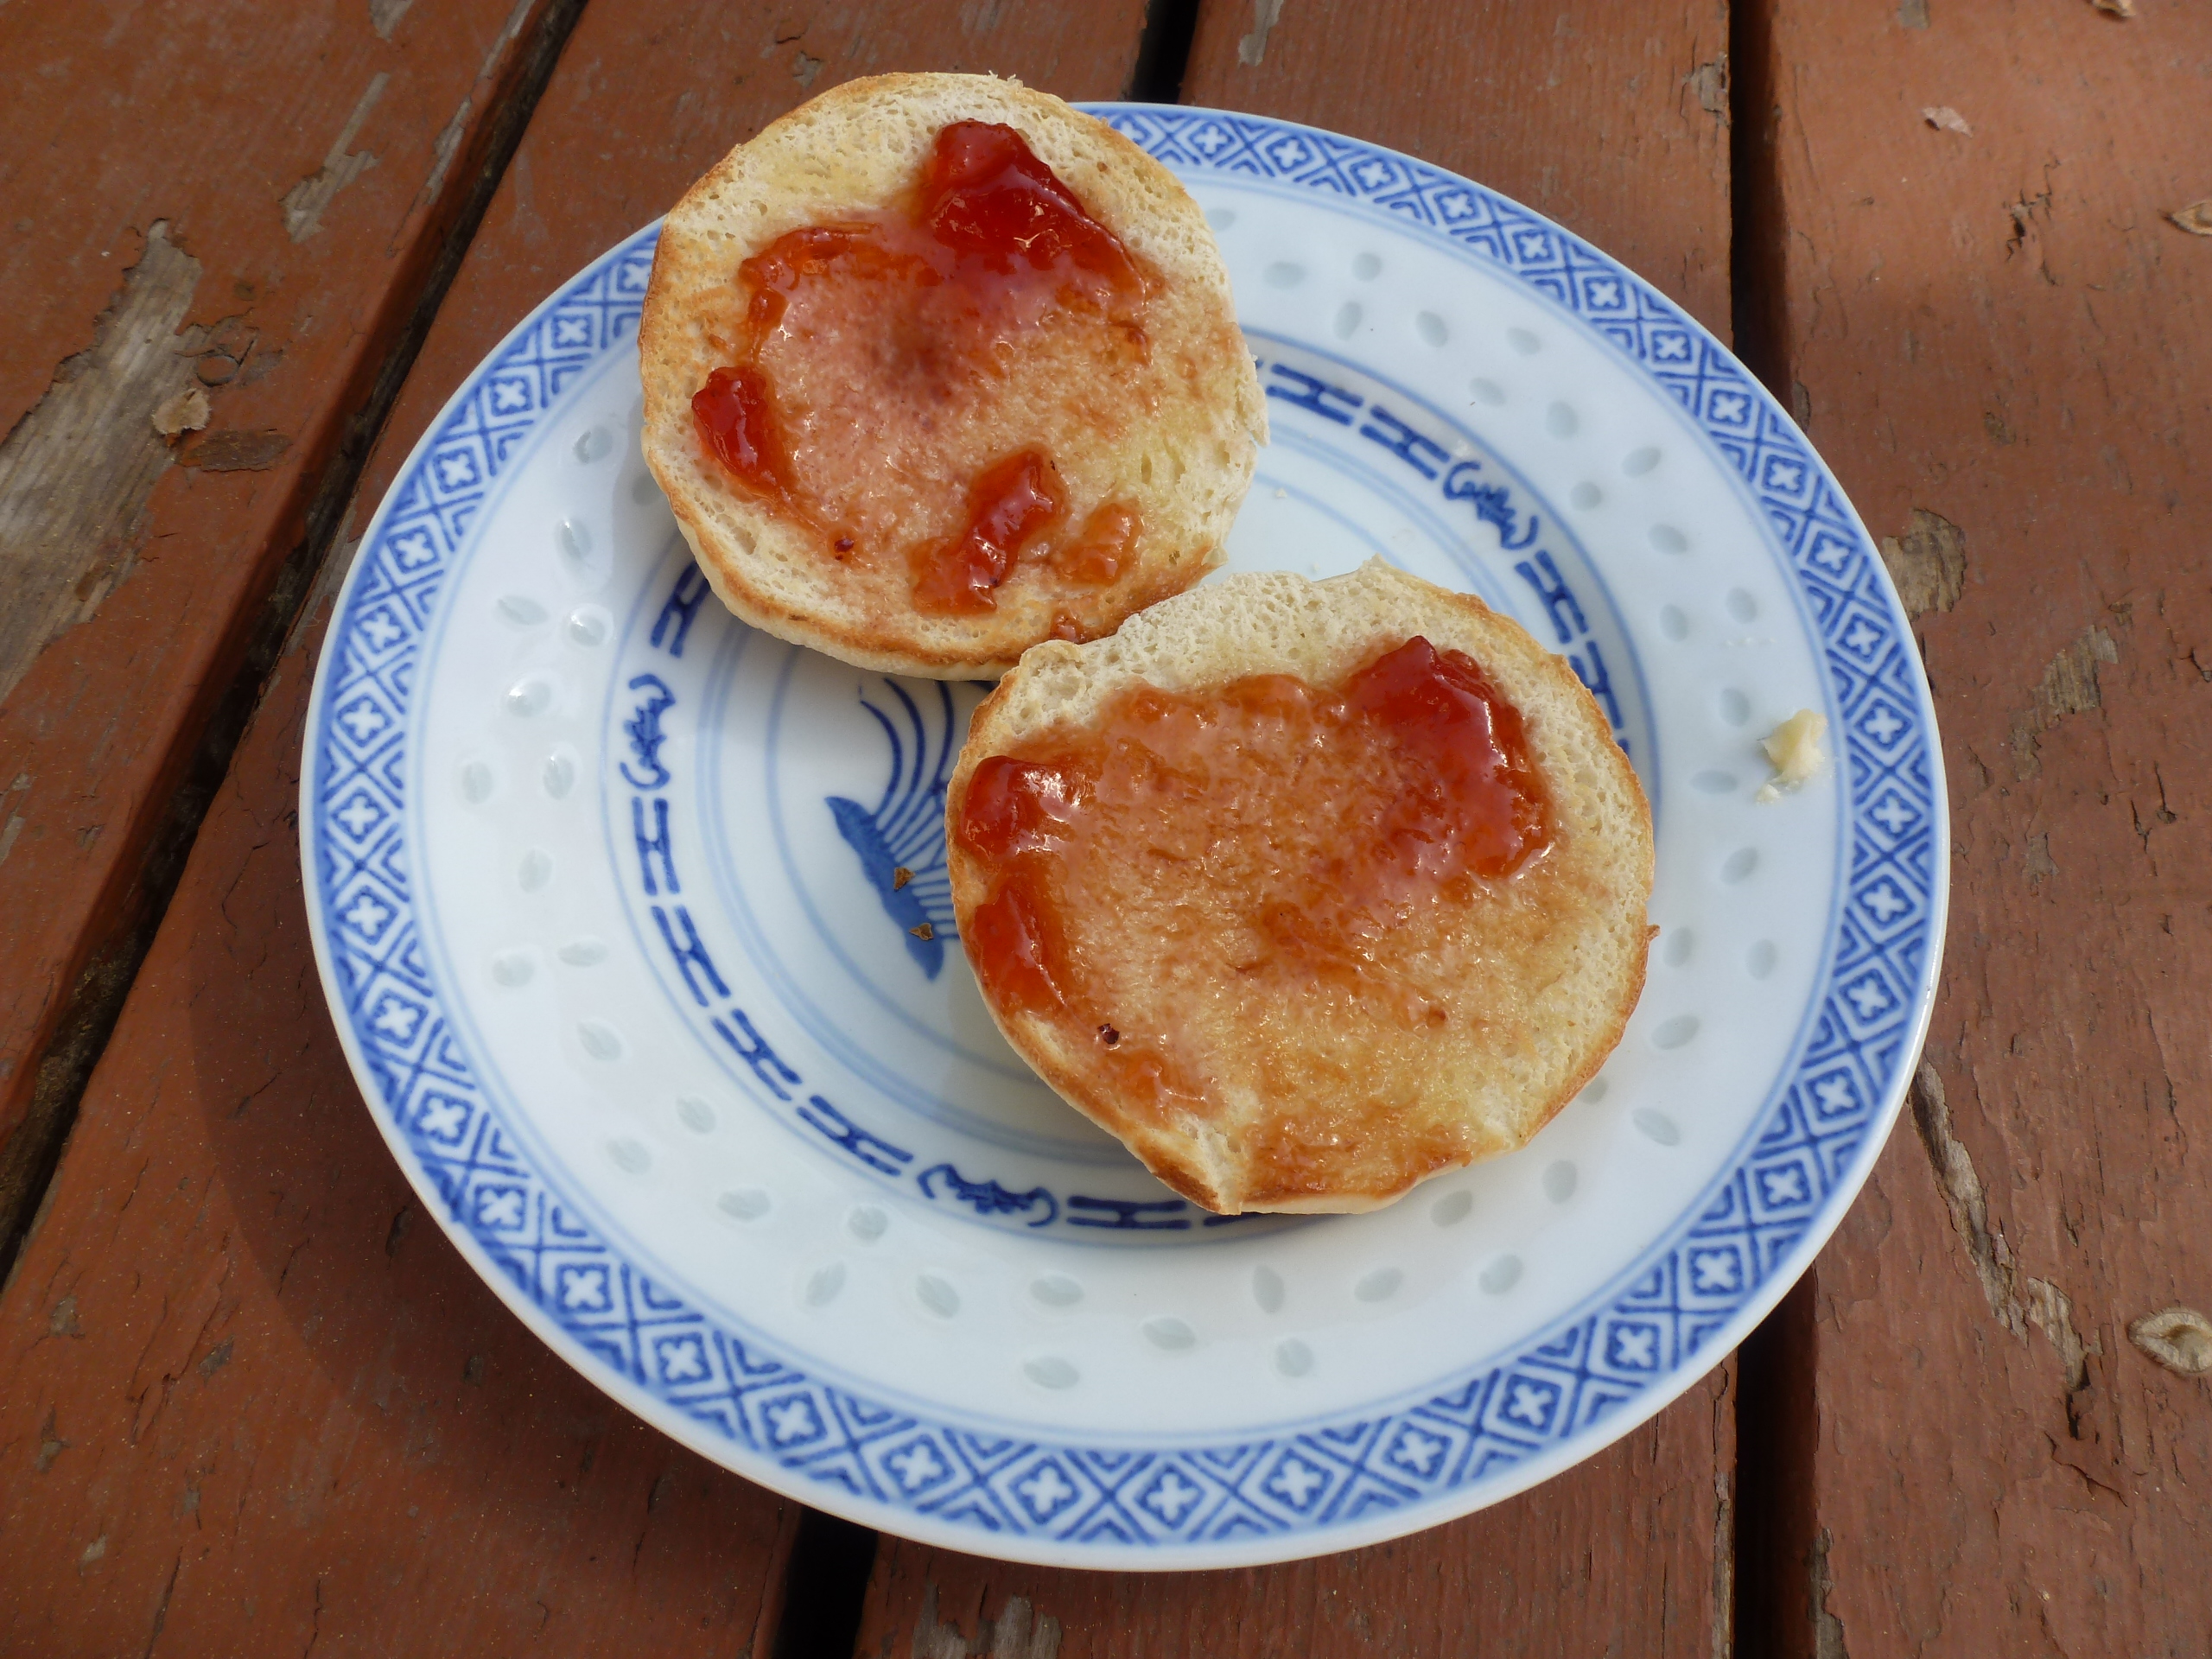 Toasted English muffins with butter and cranberry jelly